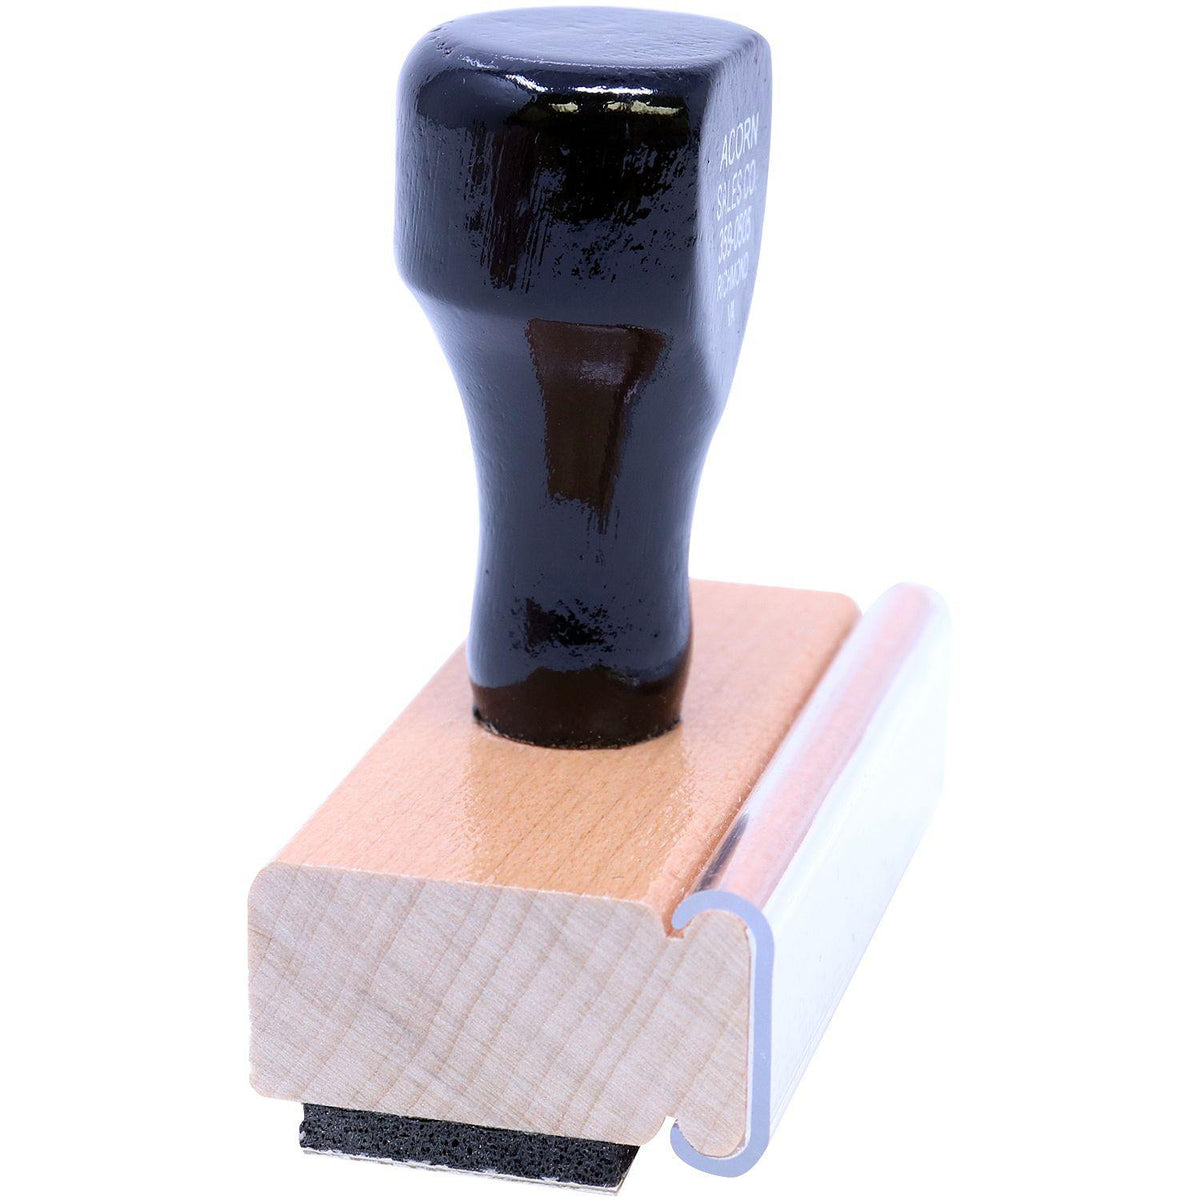 Side View of Large Not Approved For Construction Rubber Stamp at an Angle